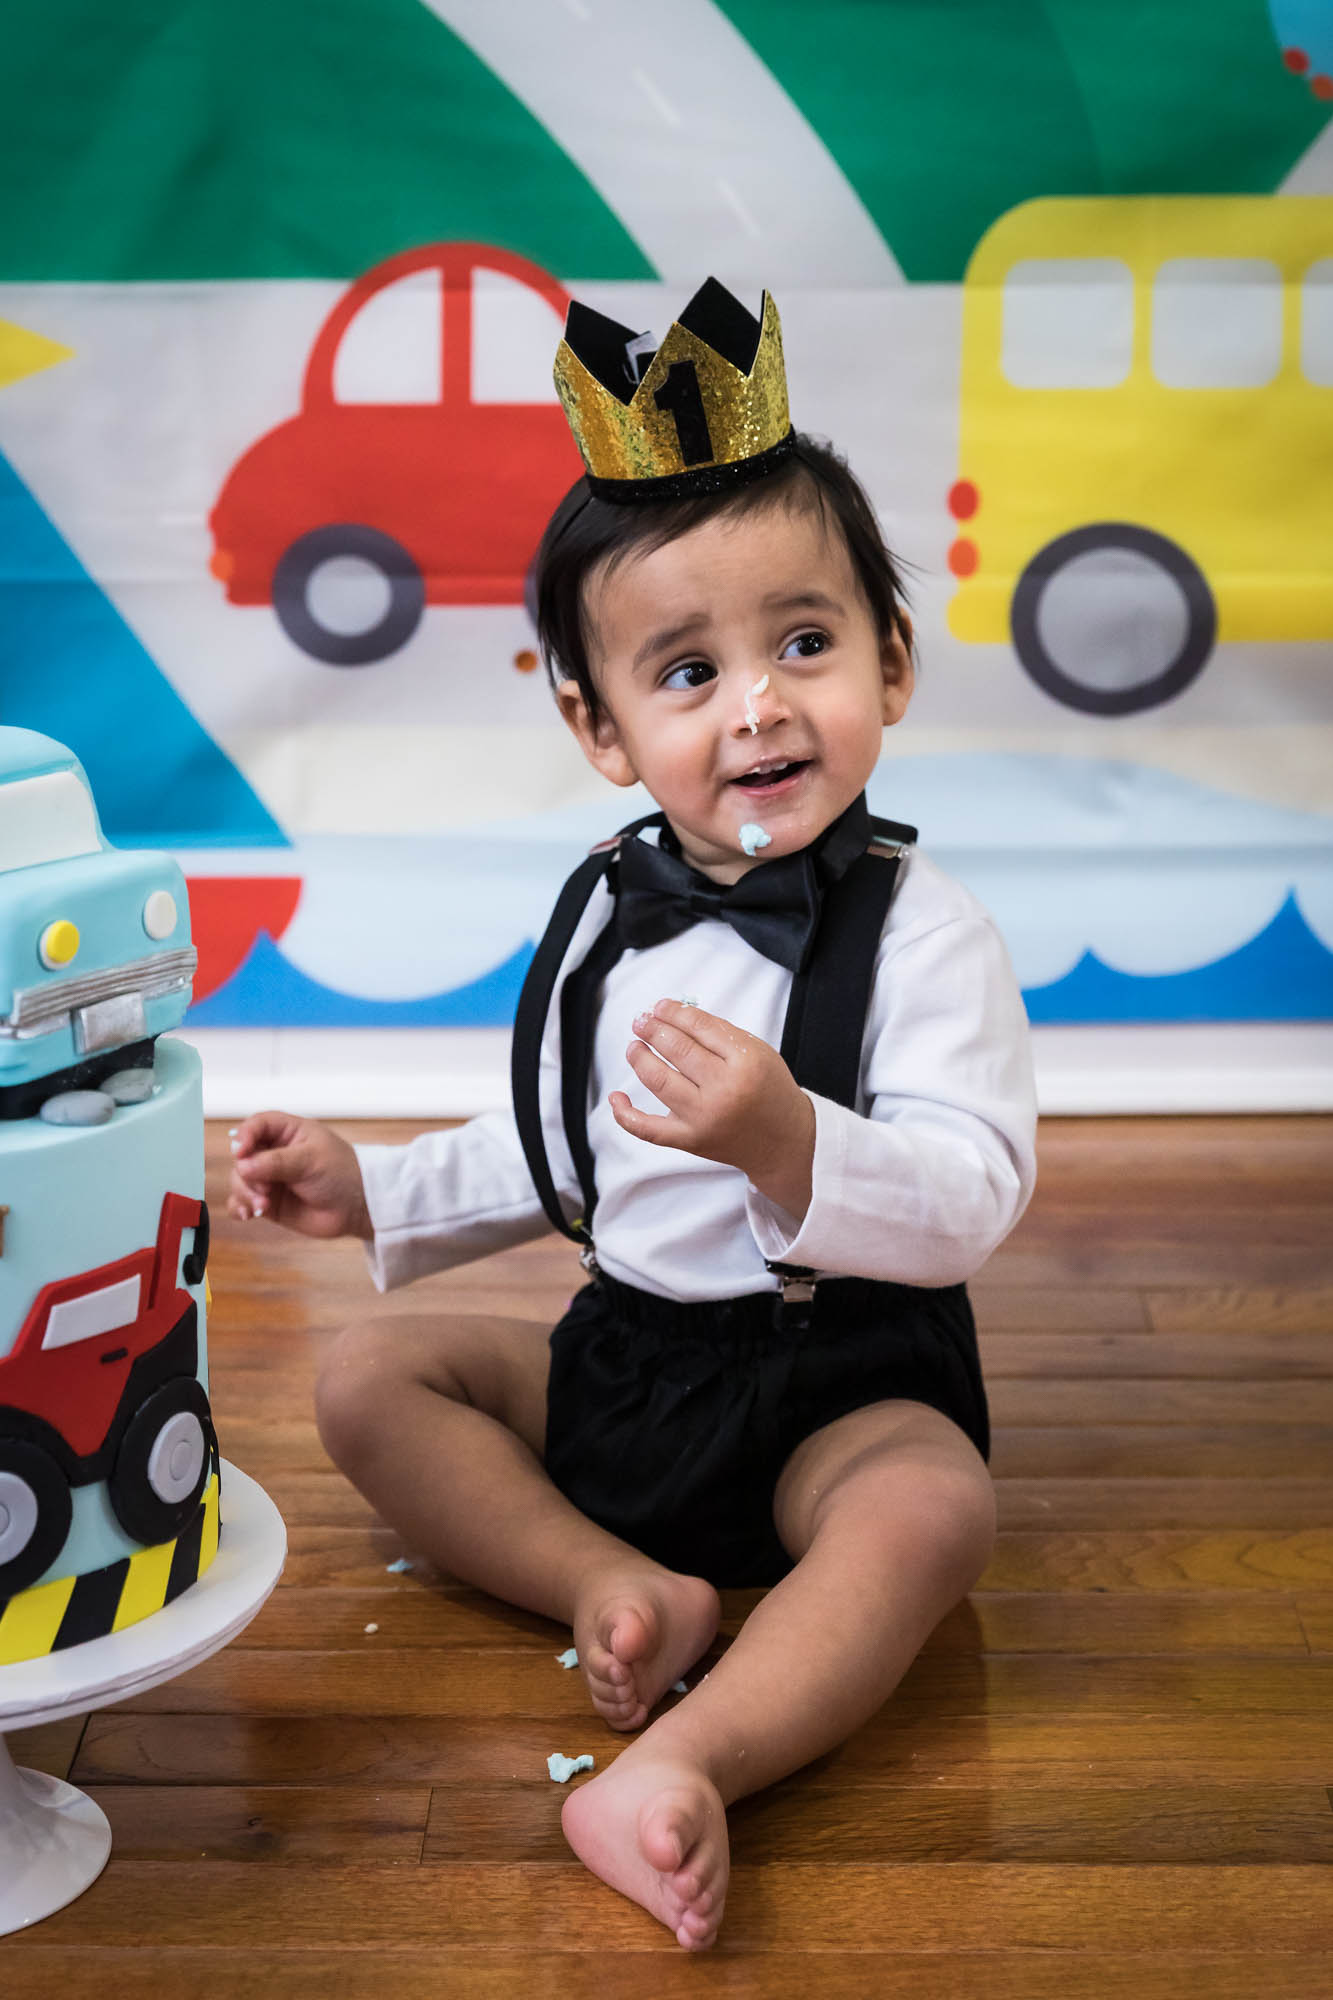 Little boy sitting on wooden floor in front of cake wearing gold crown and black bow tie for an article on cake smash tips